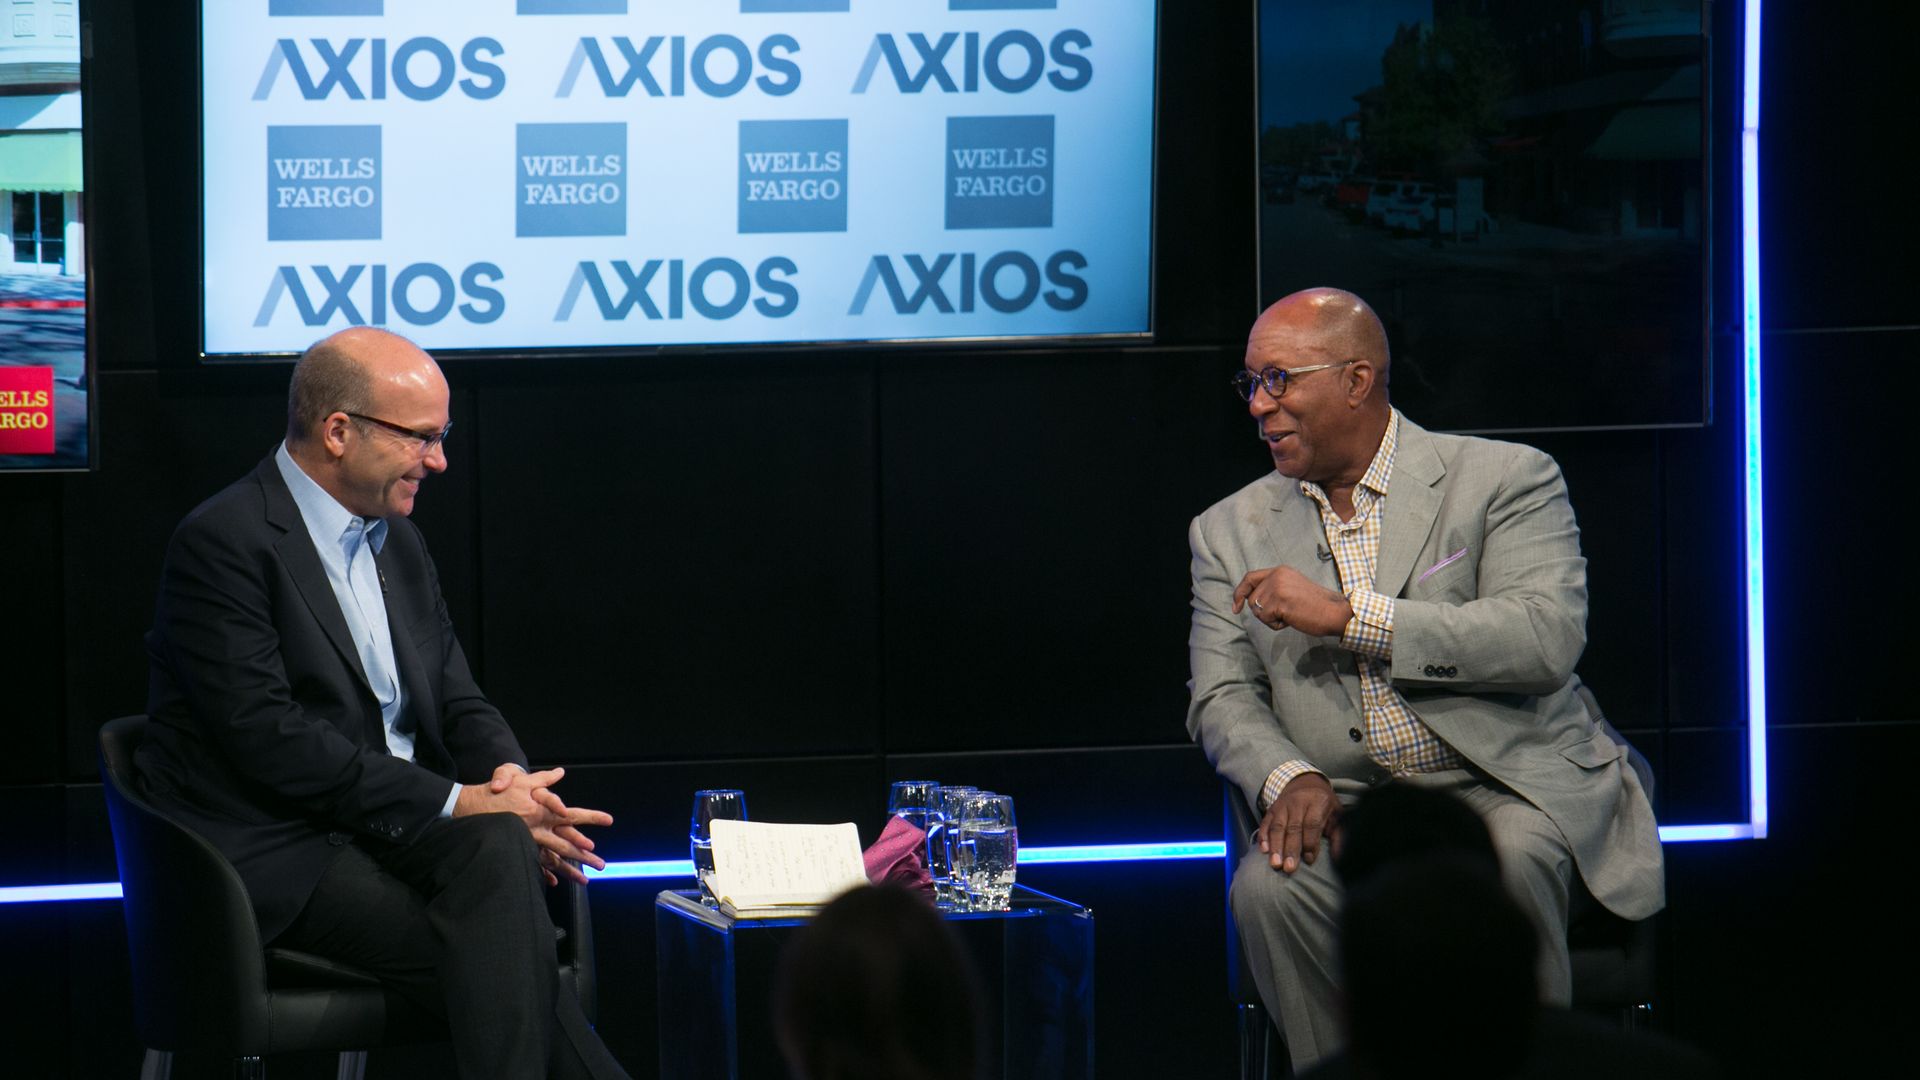 Ambassador Ron Kirk speaking with Mike Allen on the Axios stage